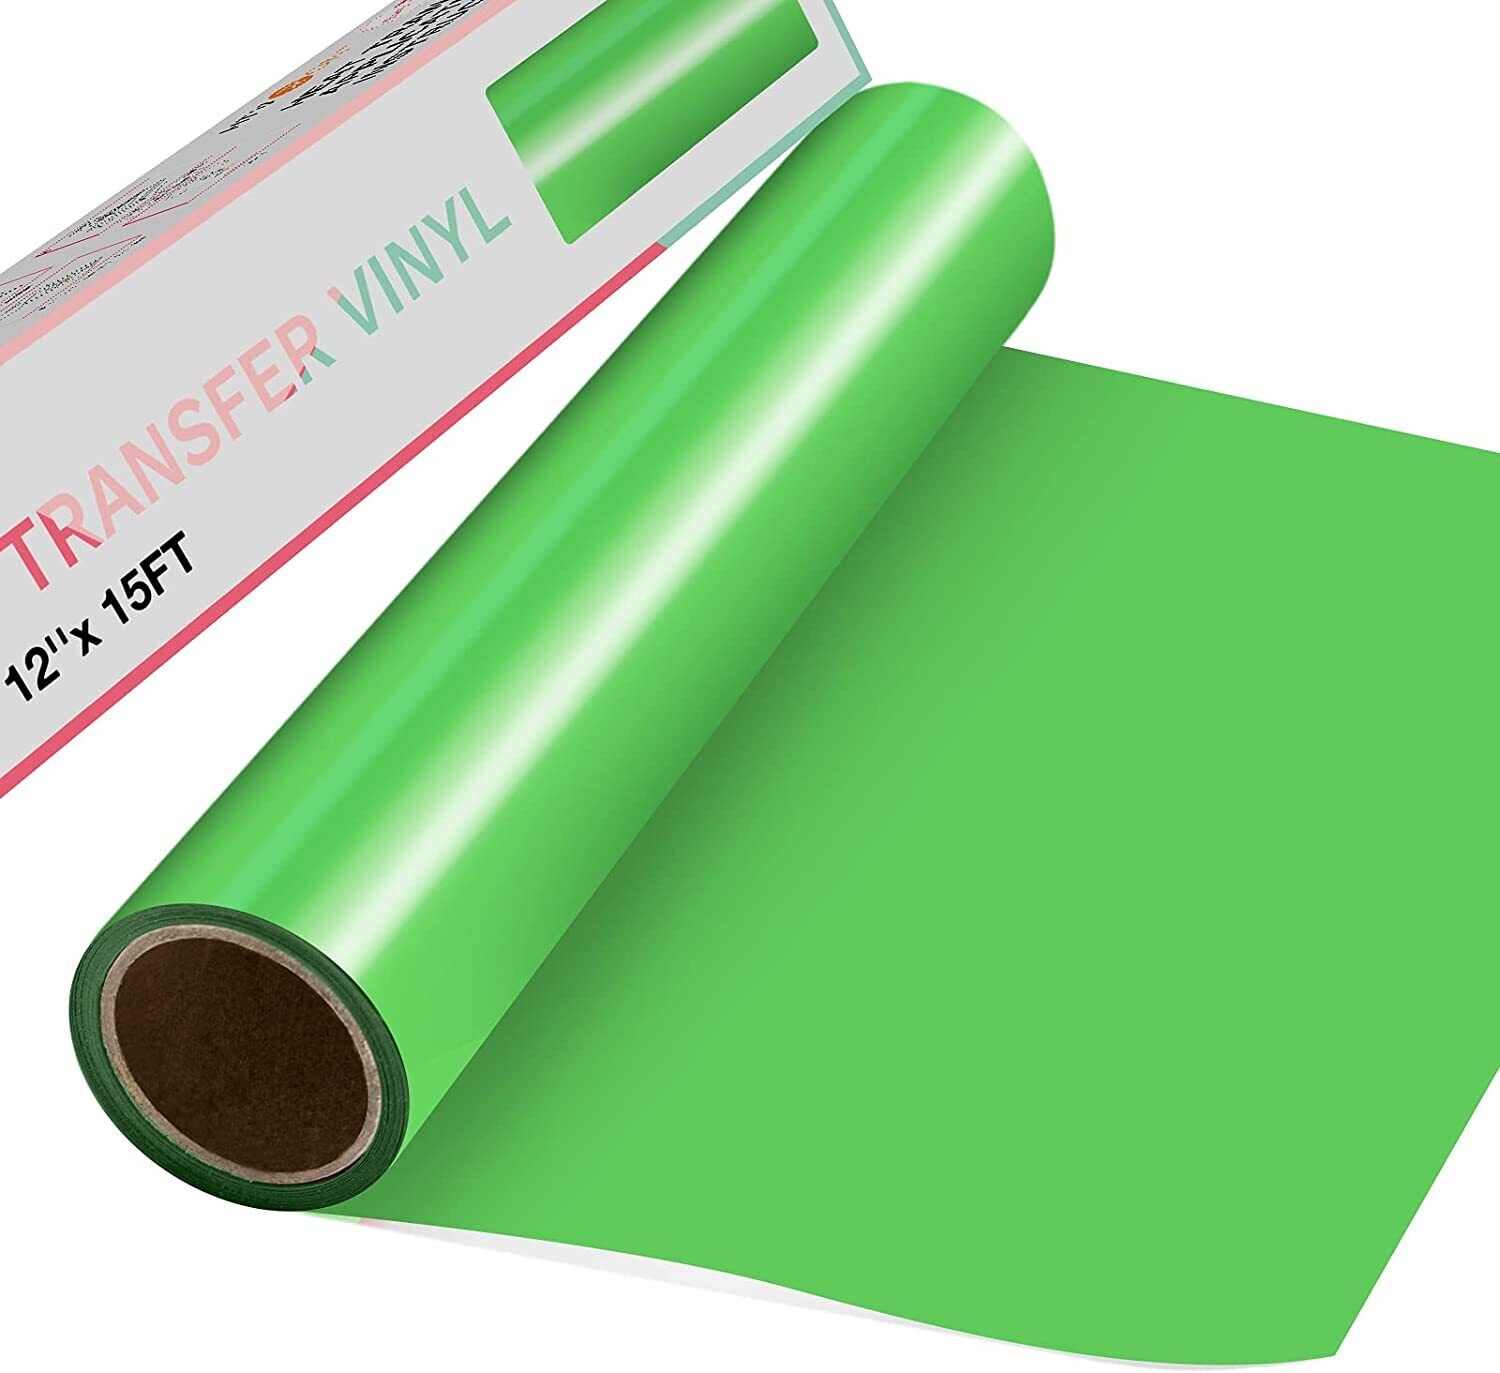 HTVRONT 12 x 15FT Heat Transfer Vinyl Fruit Green HTV Roll Iron on  T-Shirts, Clothing and Textiles for Cricut